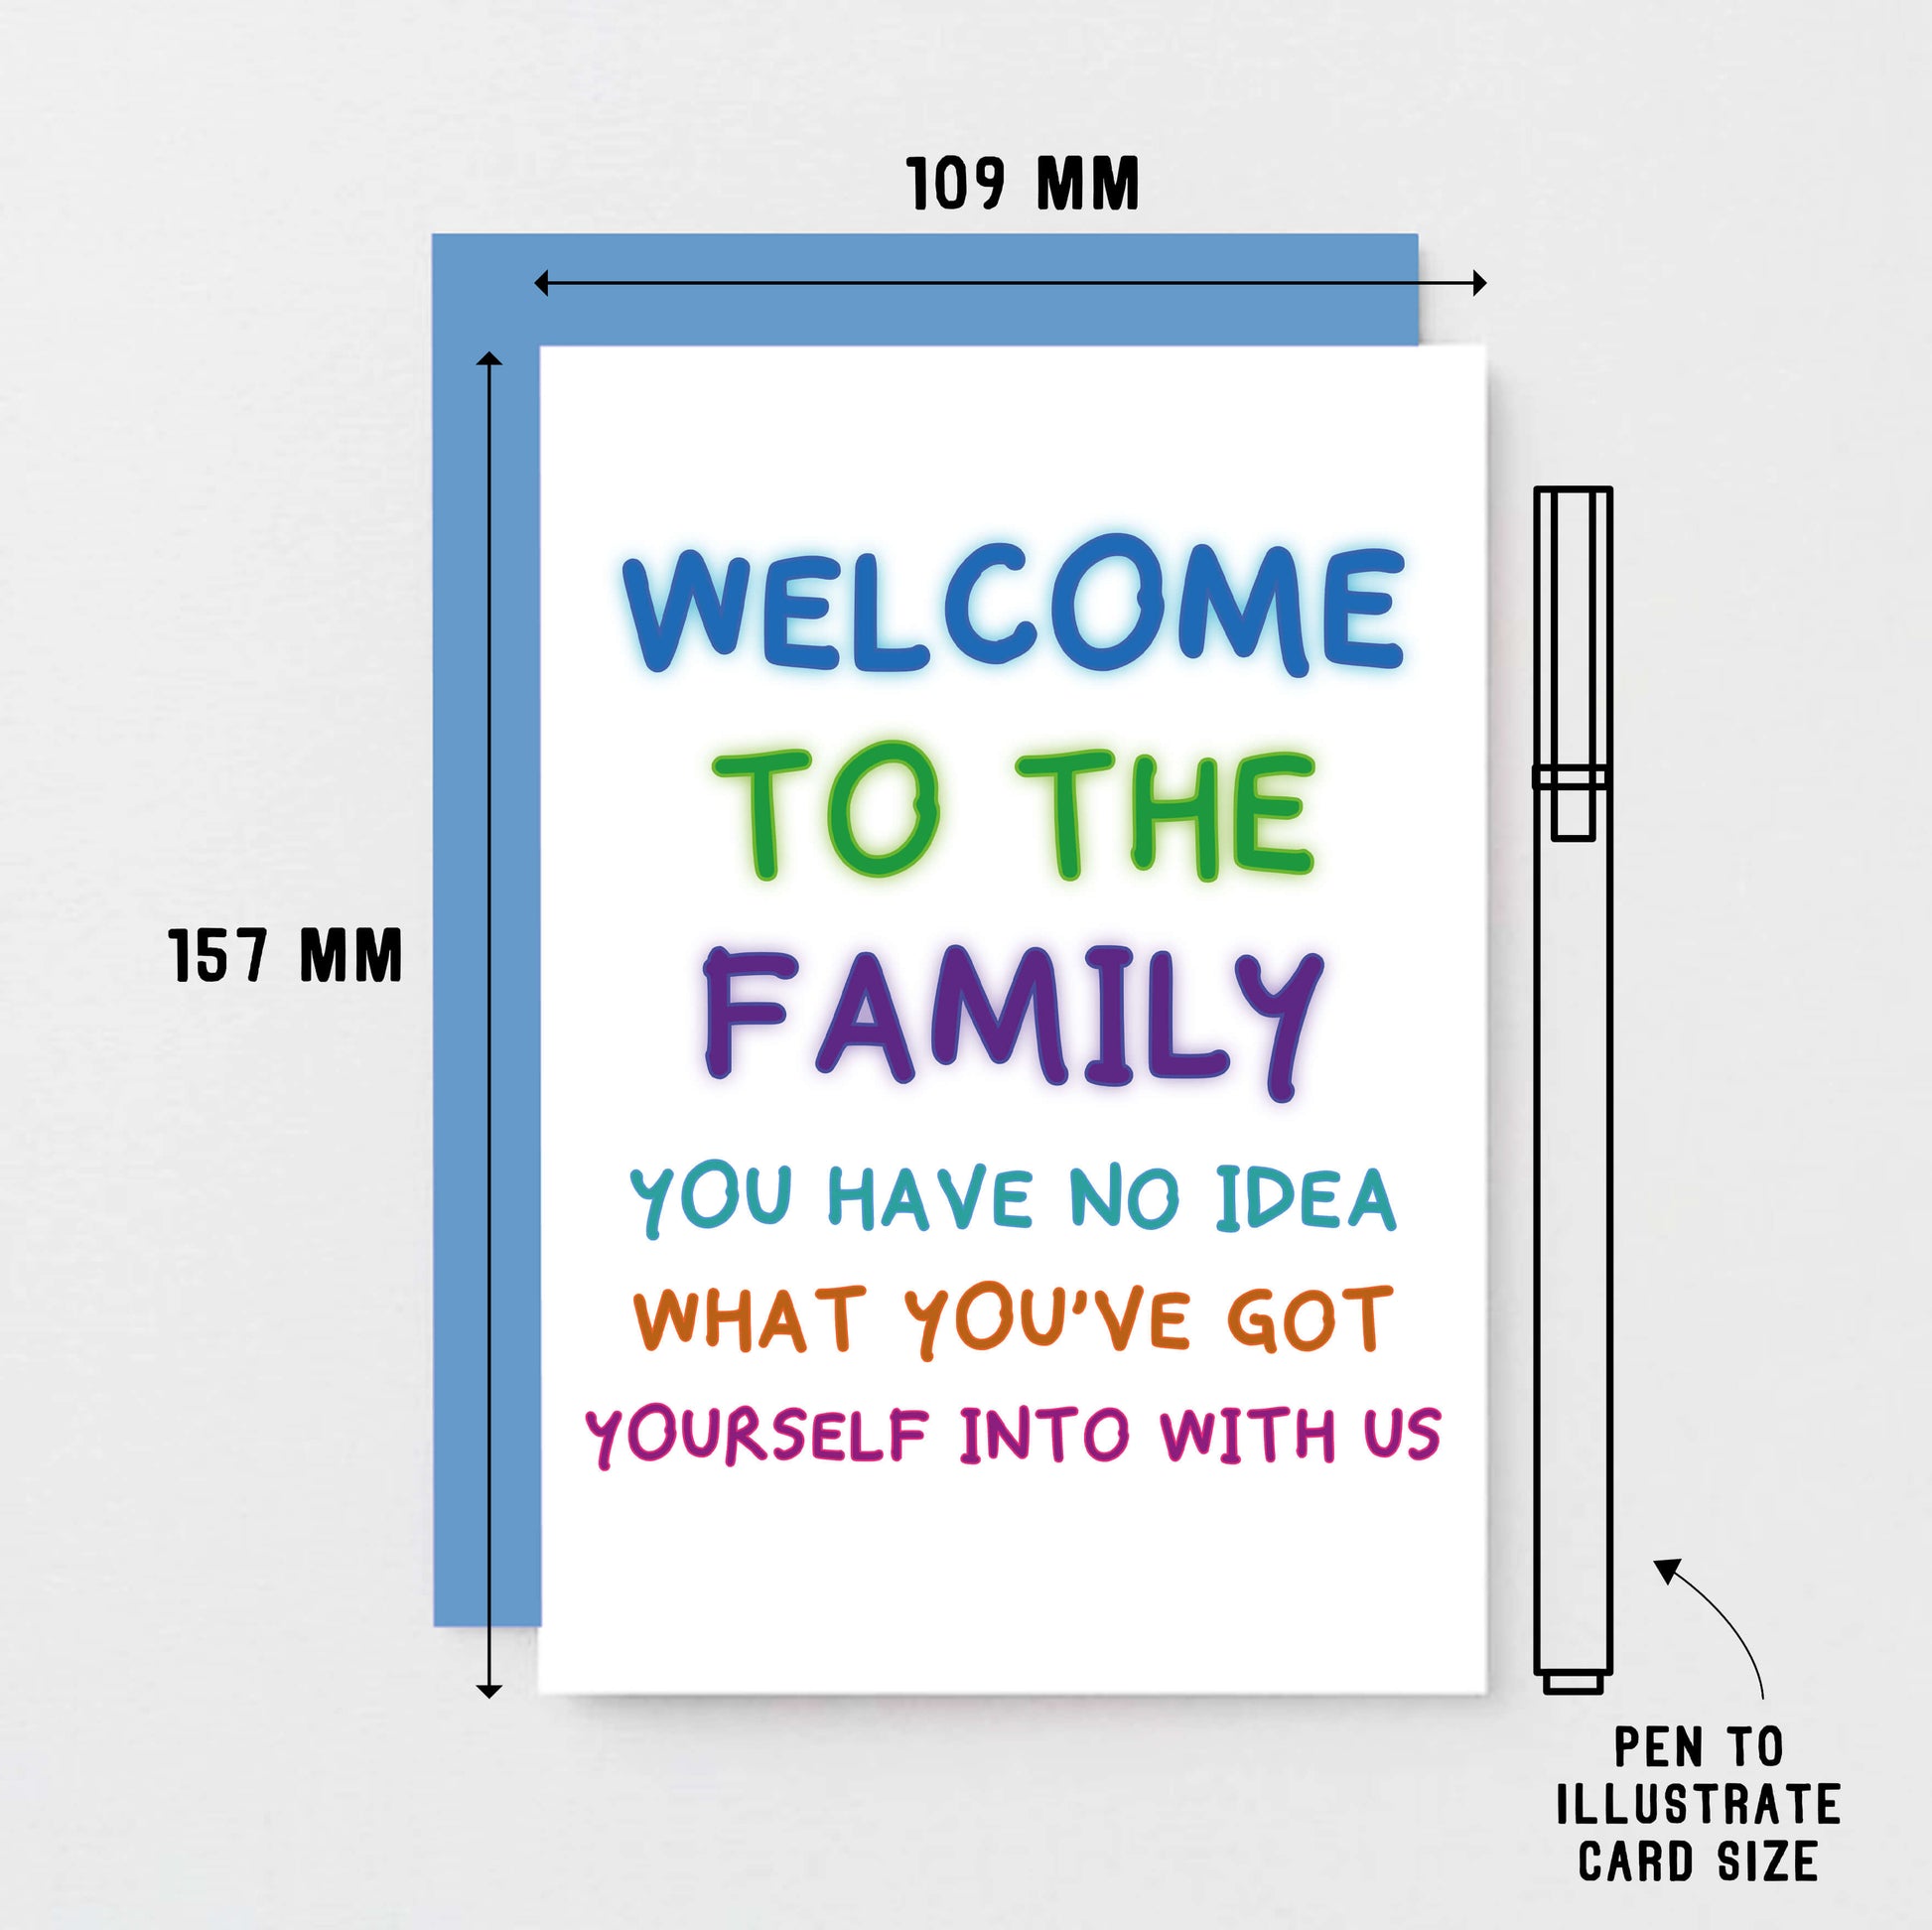 Welcome To The Family Card by SixElevenCreations. Card reads Welcome to the family. You have no idea what you've got yourself into with us. Product Code SE1001A6